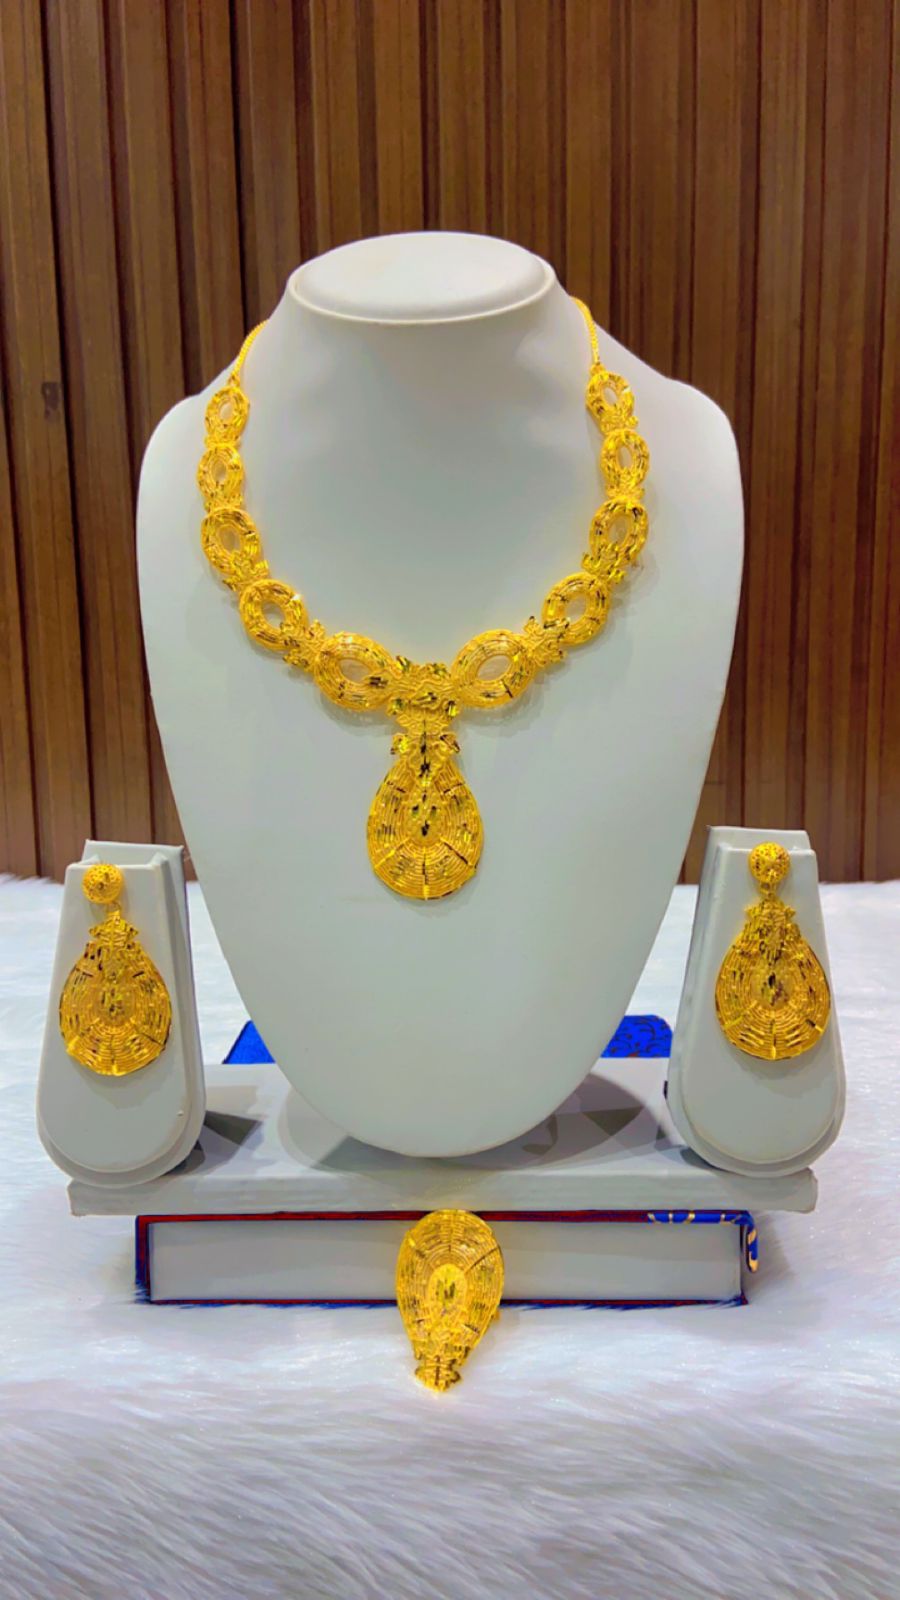 Necklace 194 – Choudhary Gold